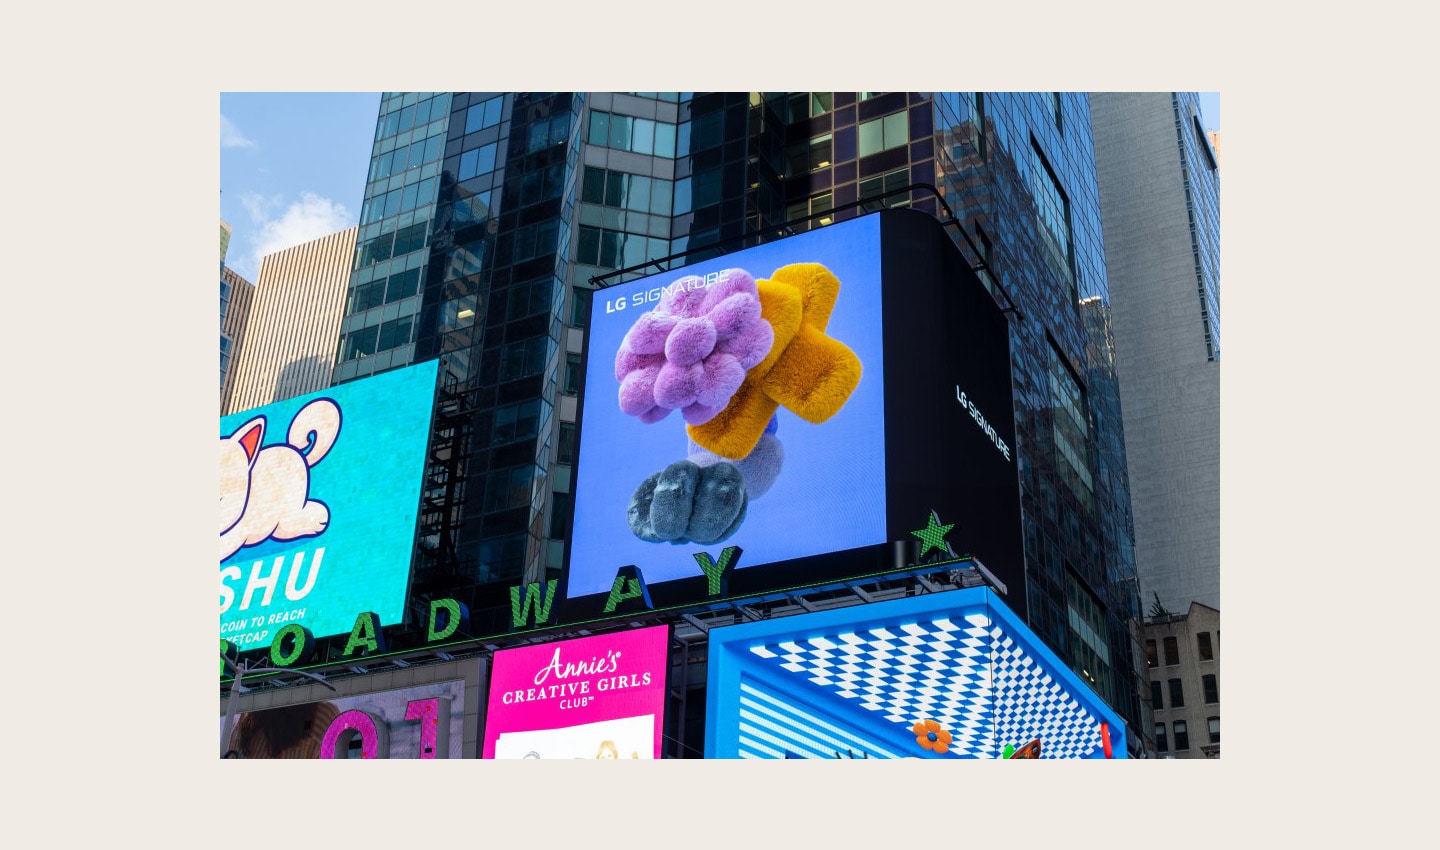 LG's digital billboard in Time Square, New York displaying an animation representing the function of LG SIGNATURE Washer and Dryer